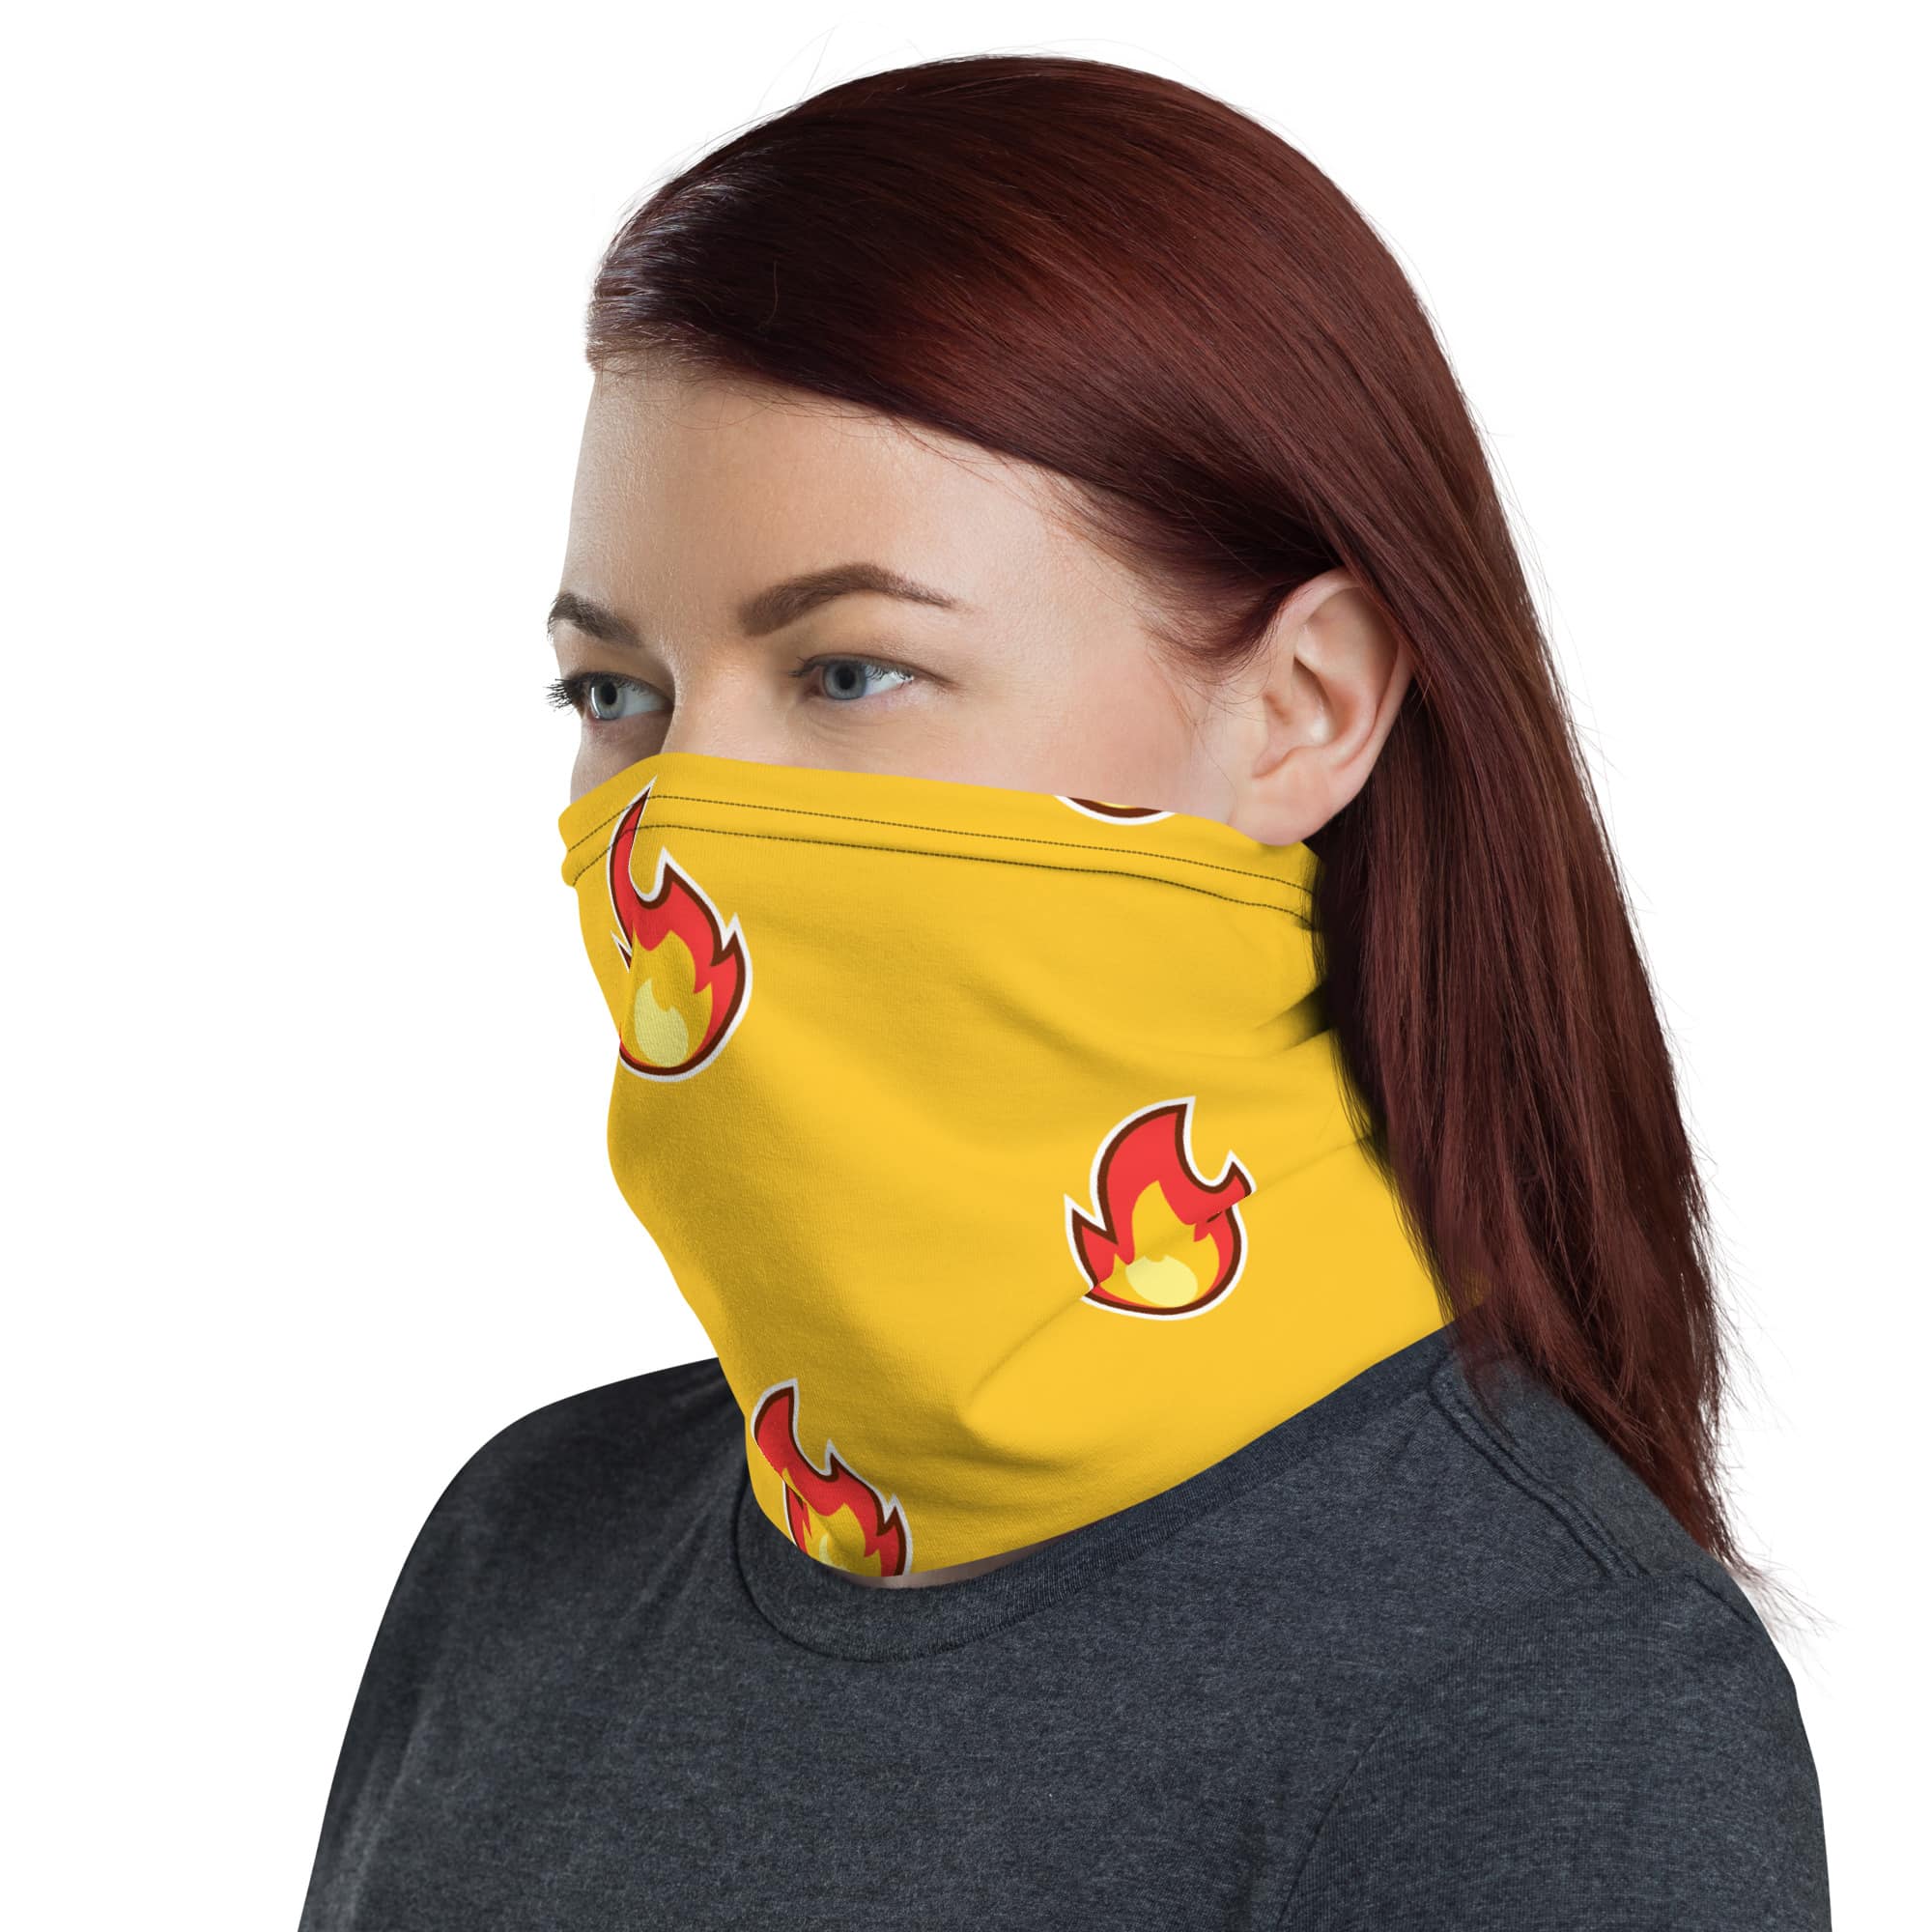 Flame Face Mask Cloth face masks Reusable face masks Washable face masks Fashion face masks Protective face masks Breathable face masks Custom face masks Printed face masks Adjustable face masks Adult face masks Fashionable face masks Stylish face masks Luxury face masks Trendy face masks High-end face masks Designer fabric masks Couture face masks Branded face masks Fashion house masks Designer logo masks Neck gaiters Gaiter masks Tube scarves Neck buffs Multi-functional neckwear Neck warmers Outdoor face coverings Sports neck gaiters Breathable neck gaiters Seamless neck tubes Bandana masks Paisley bandanas Cotton bandanas Printed bandanas Bandana scarves Multifunctional headwear Bandana face coverings Square scarves Western-style bandanas Biker bandanas Video game store Gaming merchandise Gaming accessories shop Online gaming store Video game shop near me Gaming console store PC gaming store Gaming gear shop Retro gaming shop Board game shop Anime merchandise Anime store online Japanese anime shop Anime figurines Manga shop Anime DVDs Anime accessories Anime apparel Anime collectibles Anime gifts